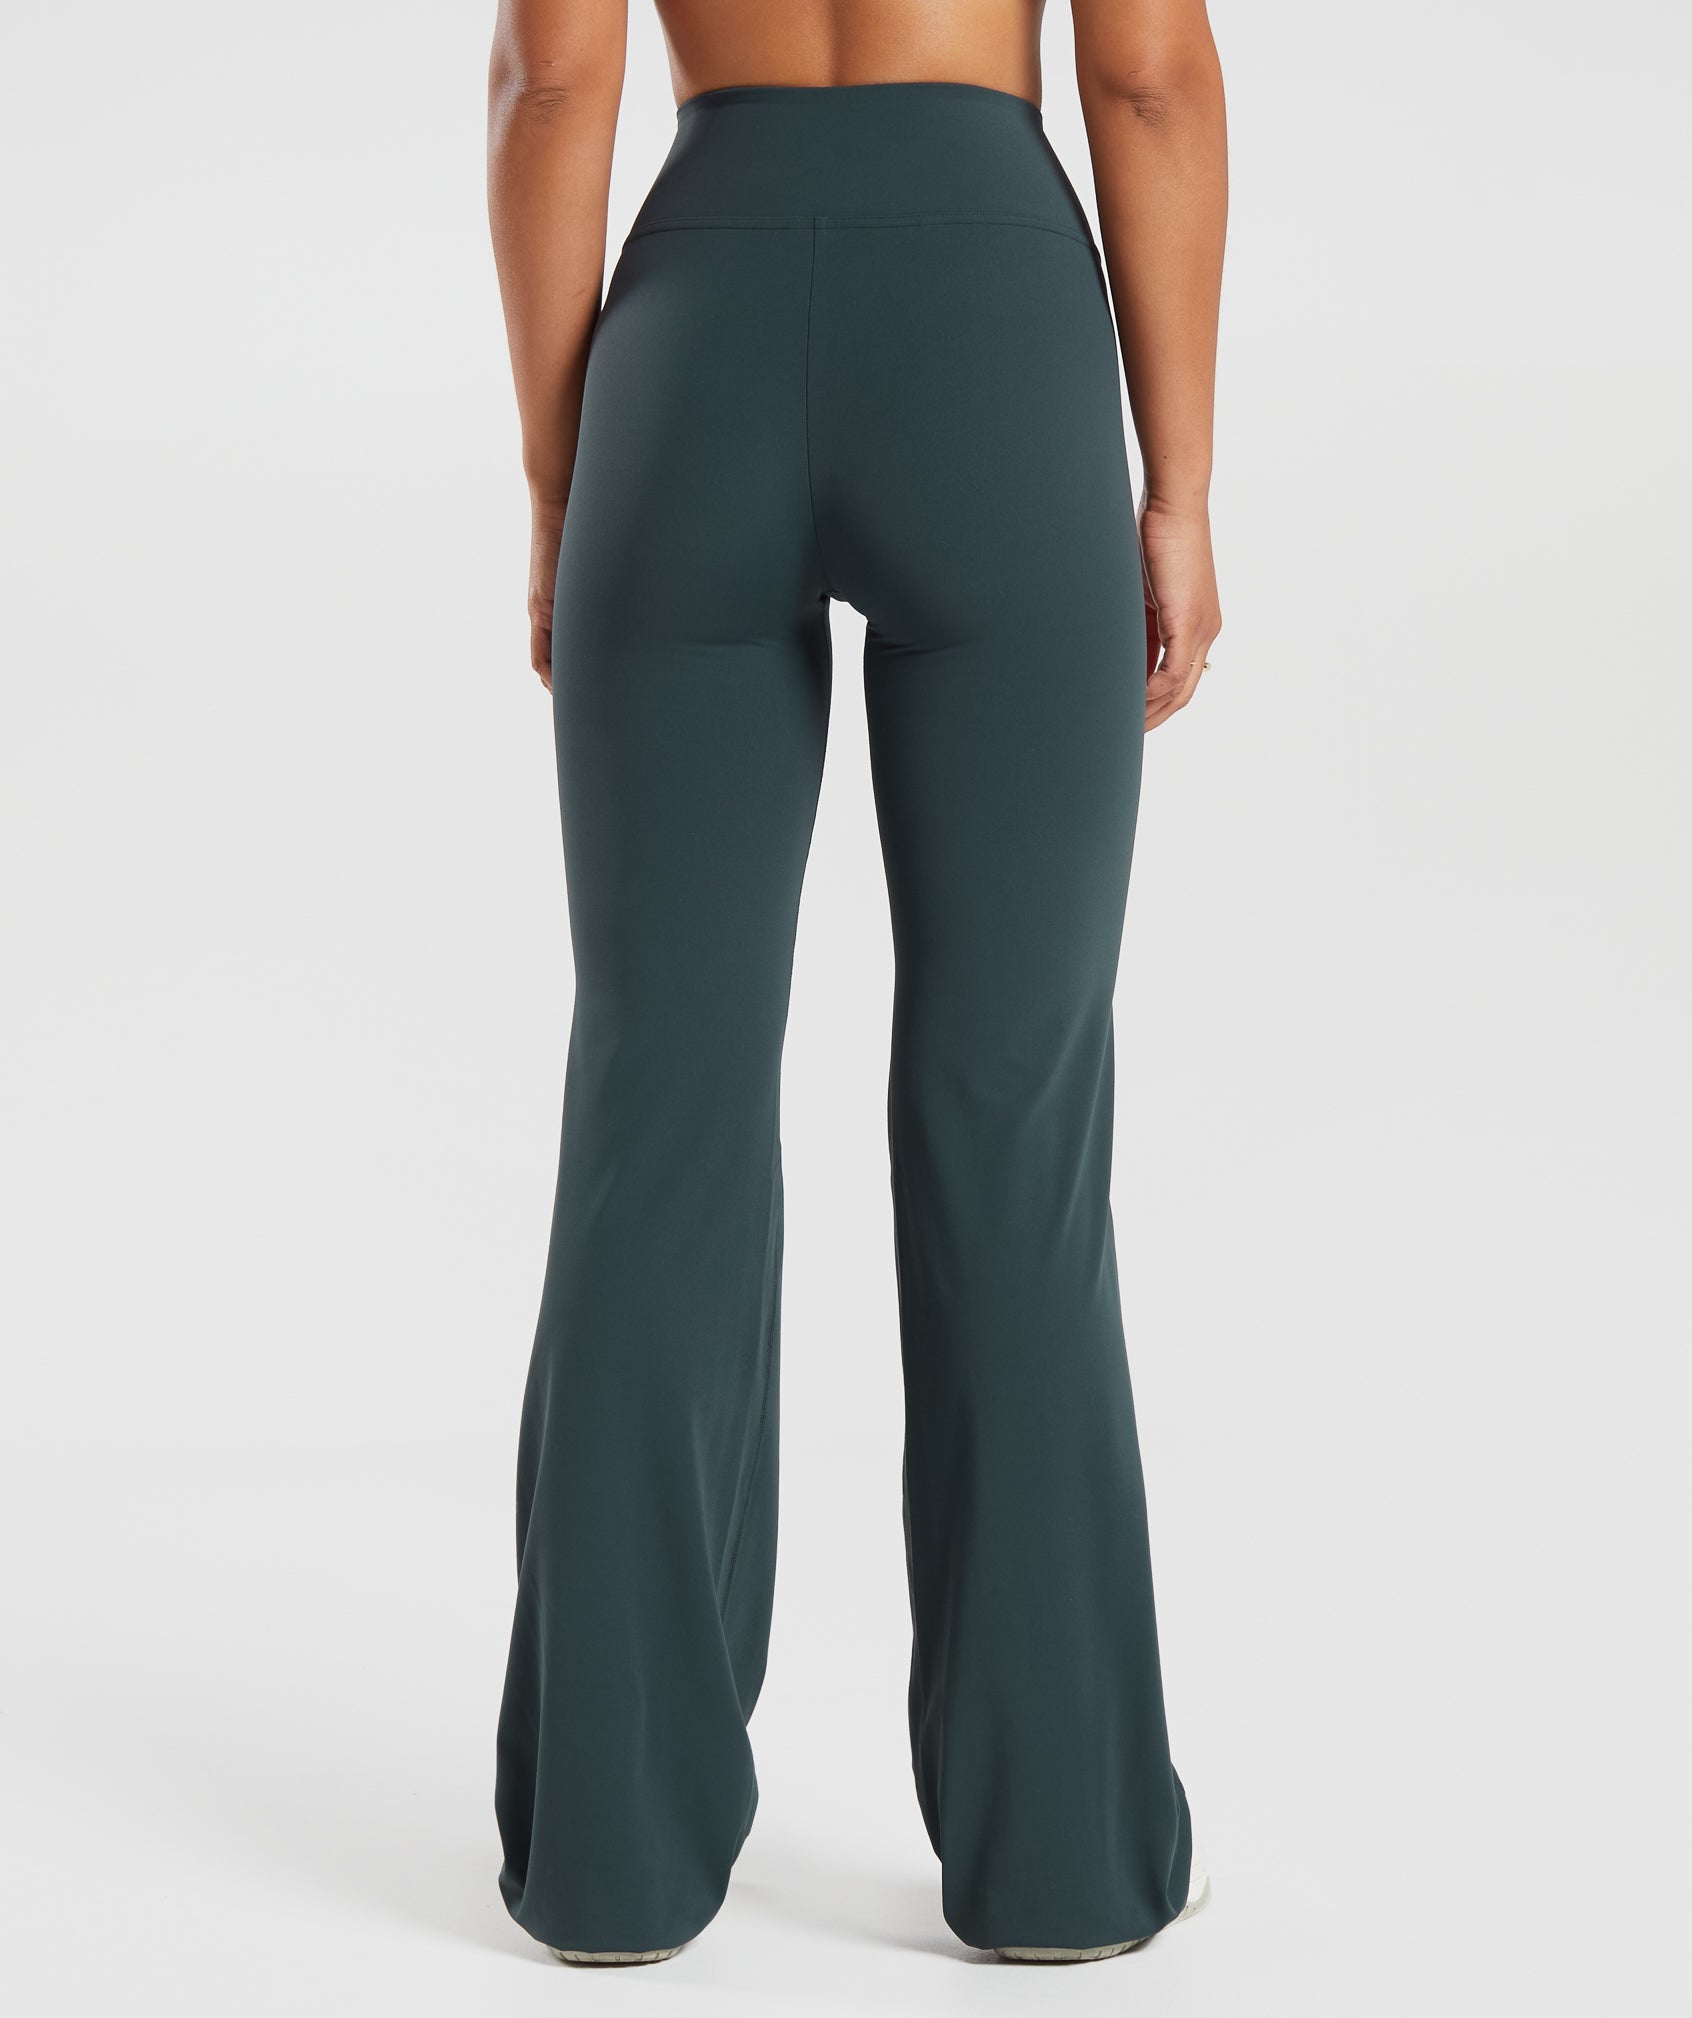 Crossover Tall Flared Leggings in Darkest Teal - view 2